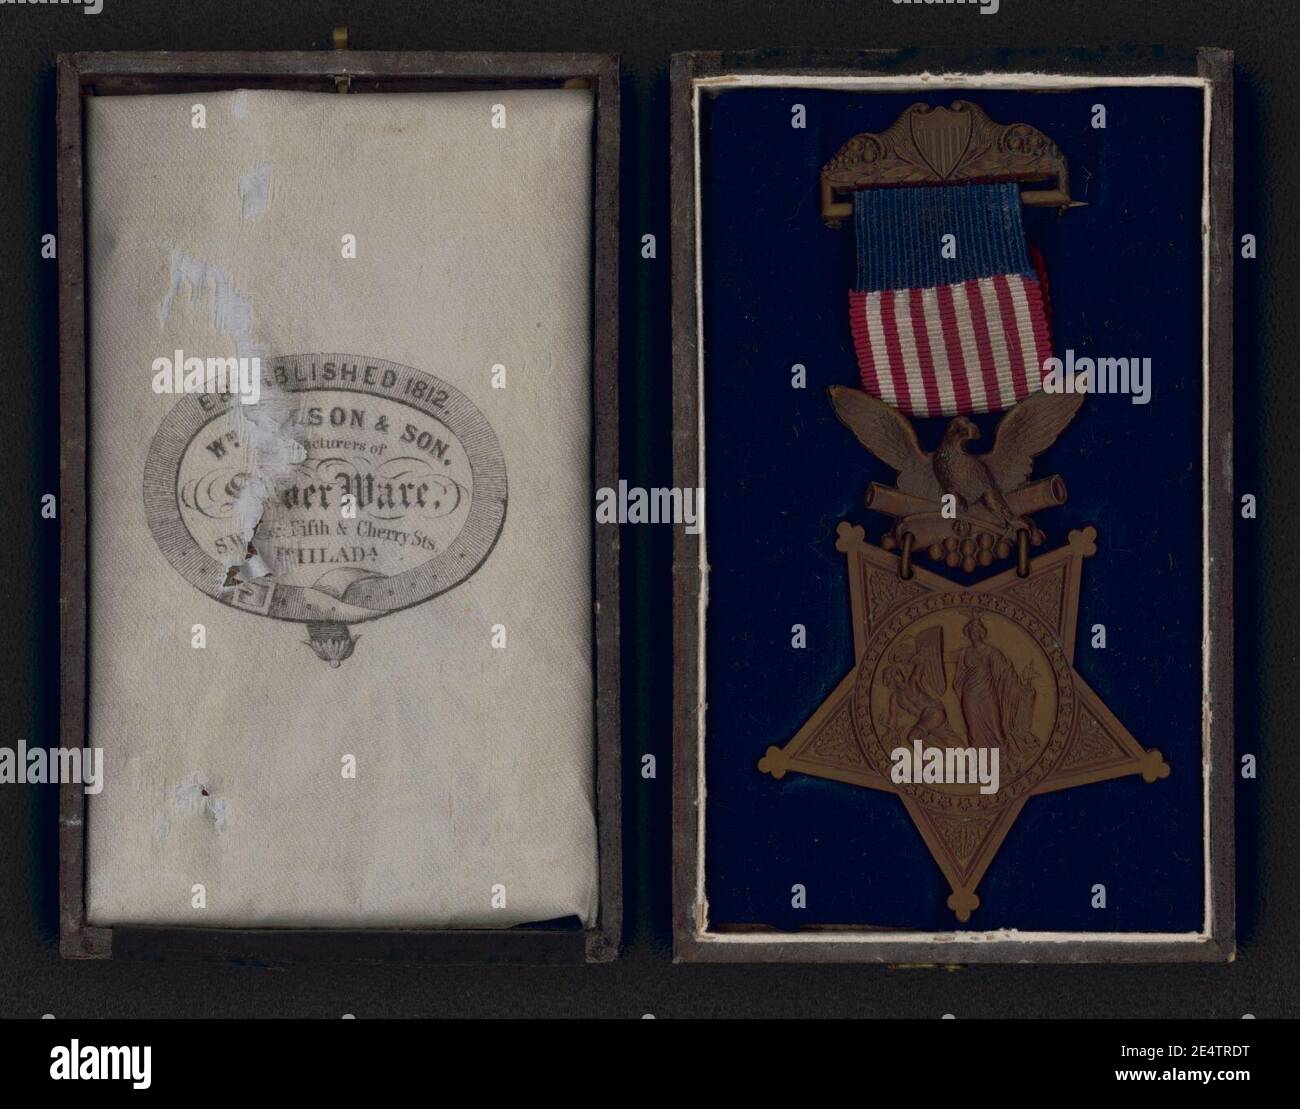 Medal of honor awarded to Captain Jeremiah Plumer of Co. F, 27th Maine Infantry Regiment Stock Photo